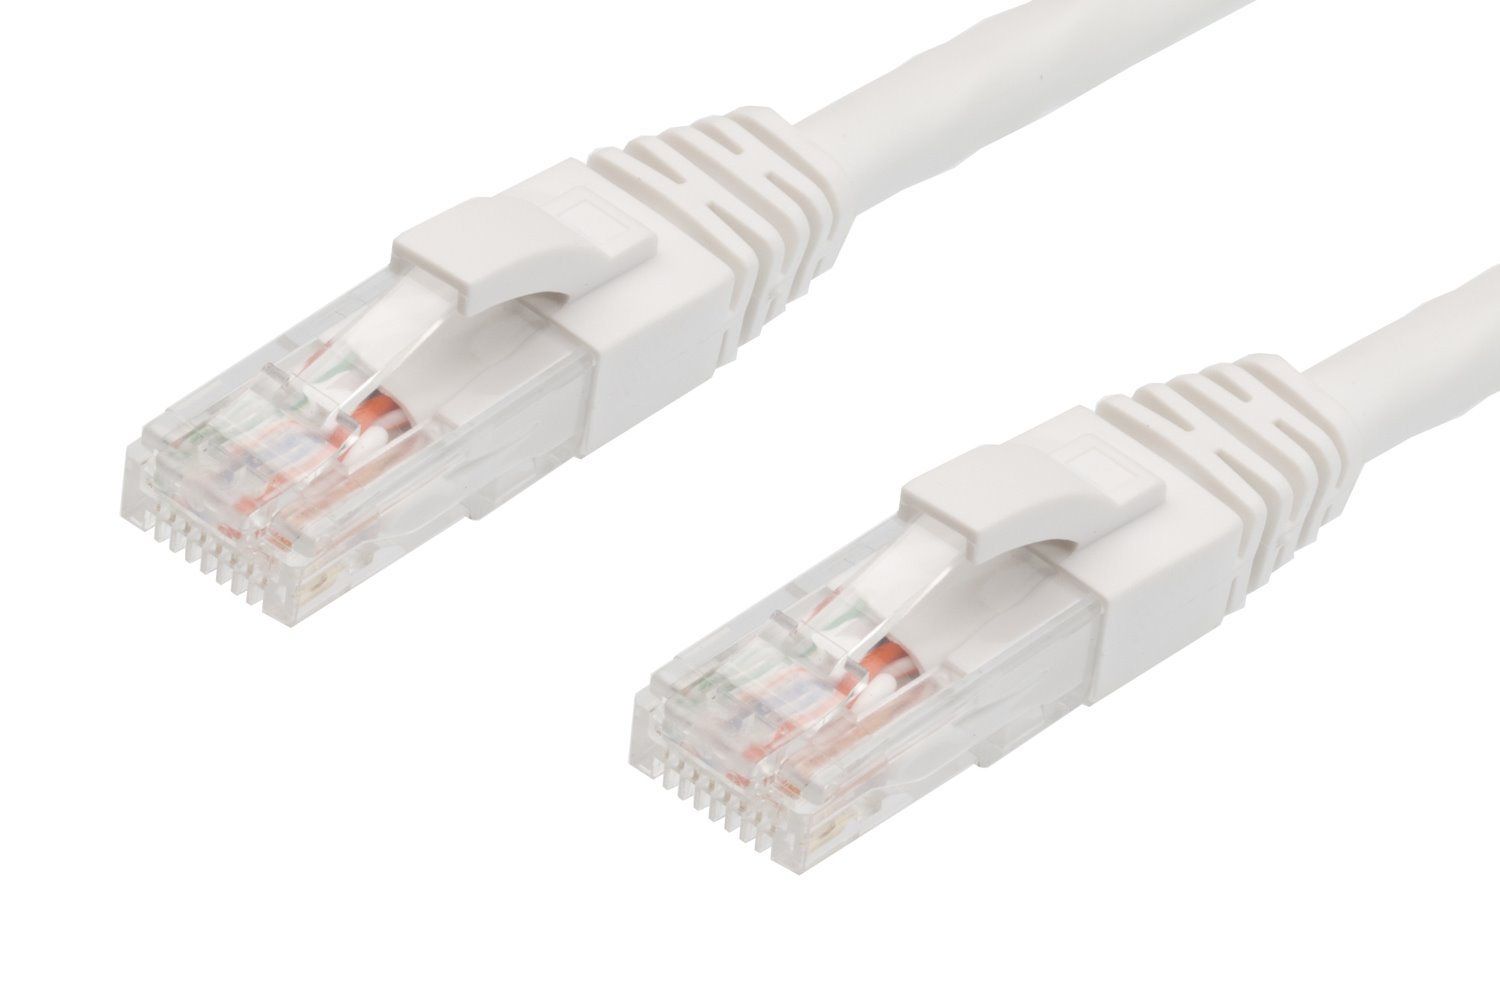 4Cabling 7M RJ45 Cat6 Ethernet Cable. White